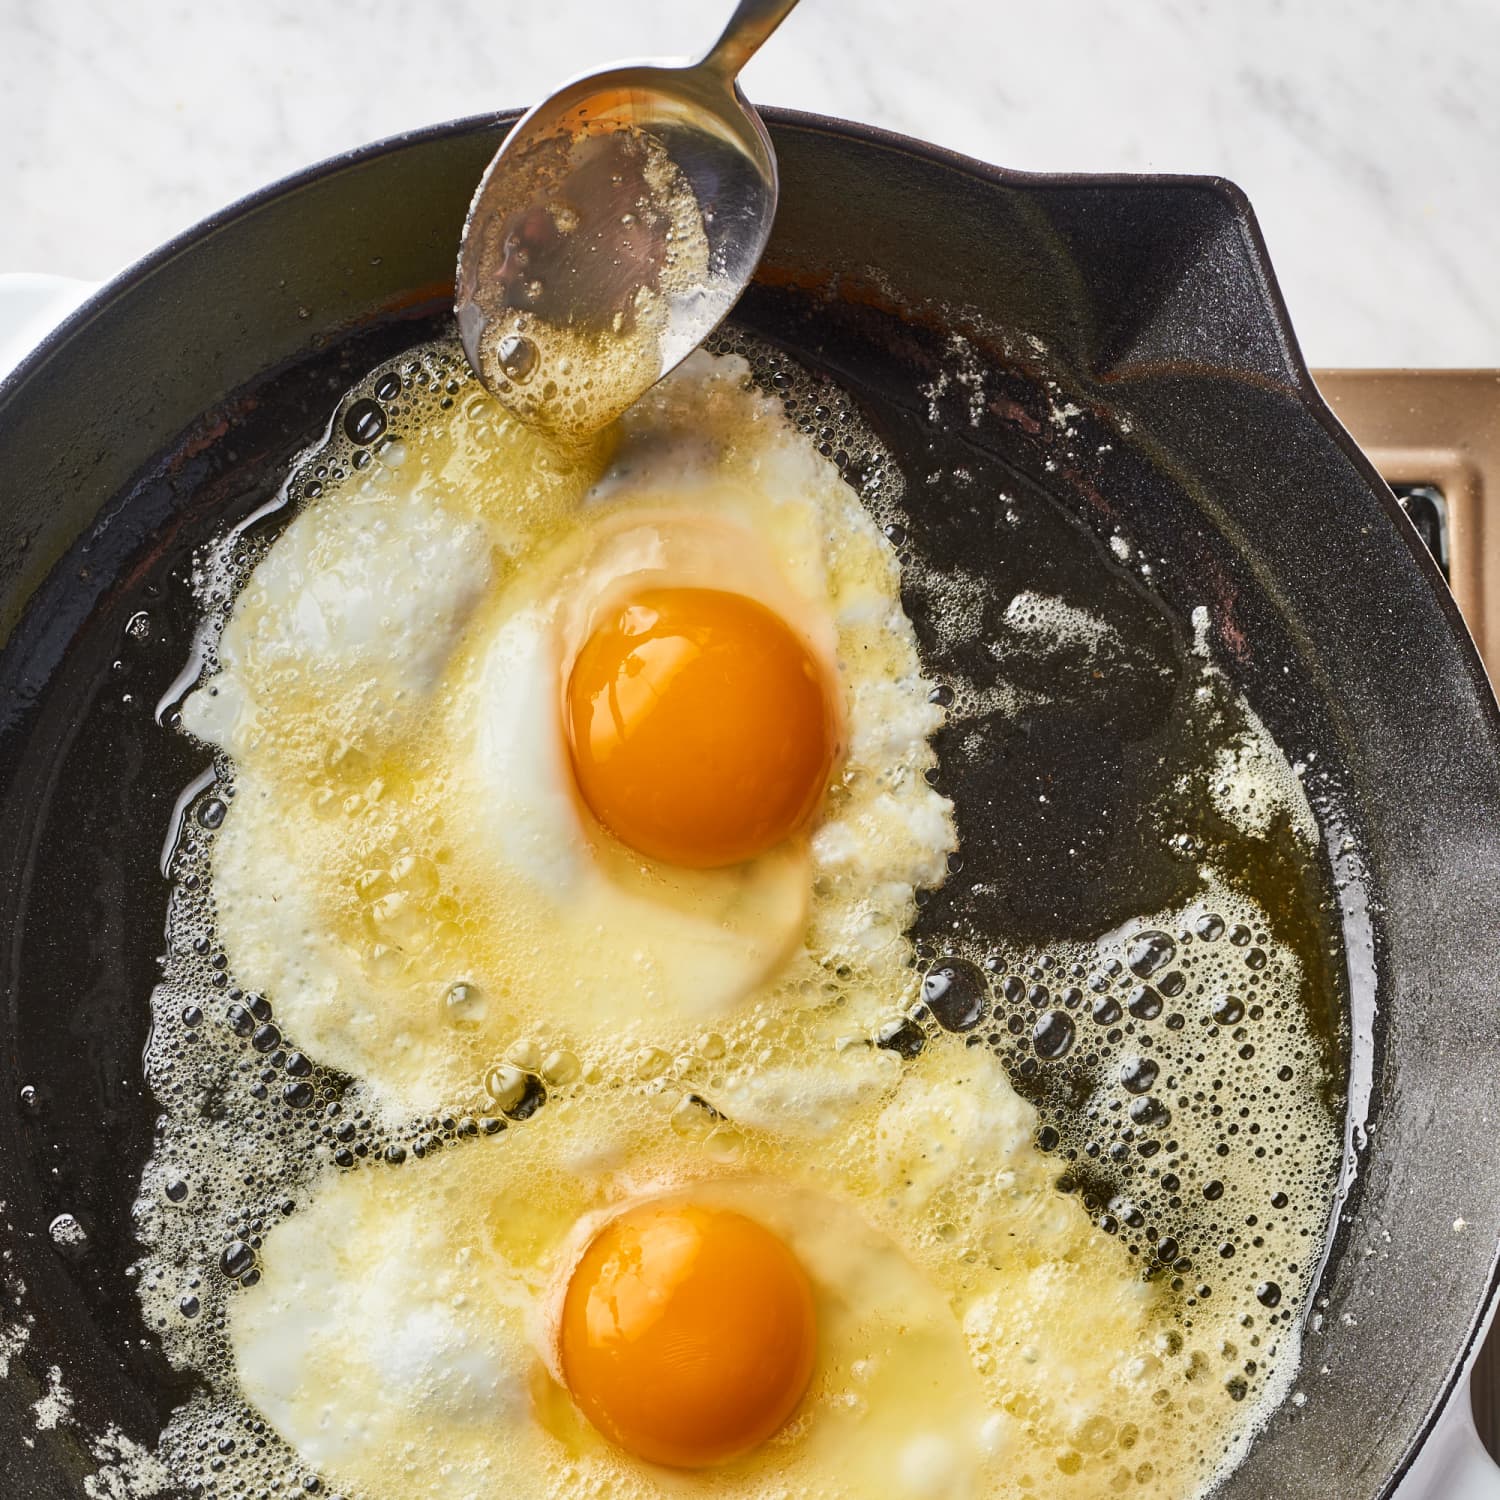 https://cdn.apartmenttherapy.info/image/upload/f_jpg,q_auto:eco,c_fill,g_auto,w_1500,ar_1:1/k%2FPhoto%2FRecipes%2F2019-09-butter-basted-eggs%2FButter-Basted-Eggs_006